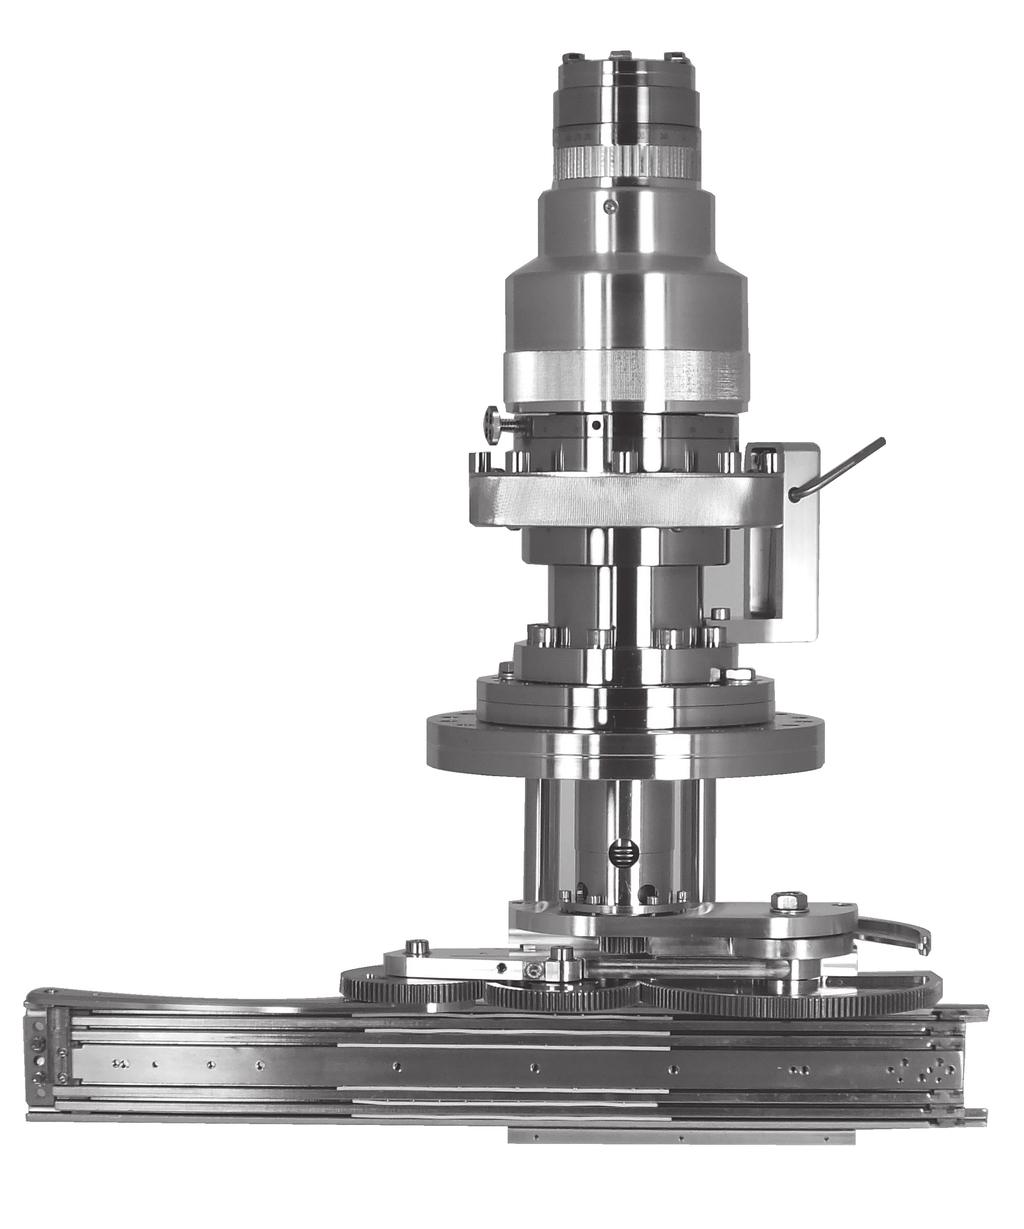 Rotary 2-Axis Source Shutters (Rotary & telescopic ) Magnetically-coupled MagiDrive provides arm The 2-axis provides 360 rotation and 760mm linear within an ultra-compact footprint.